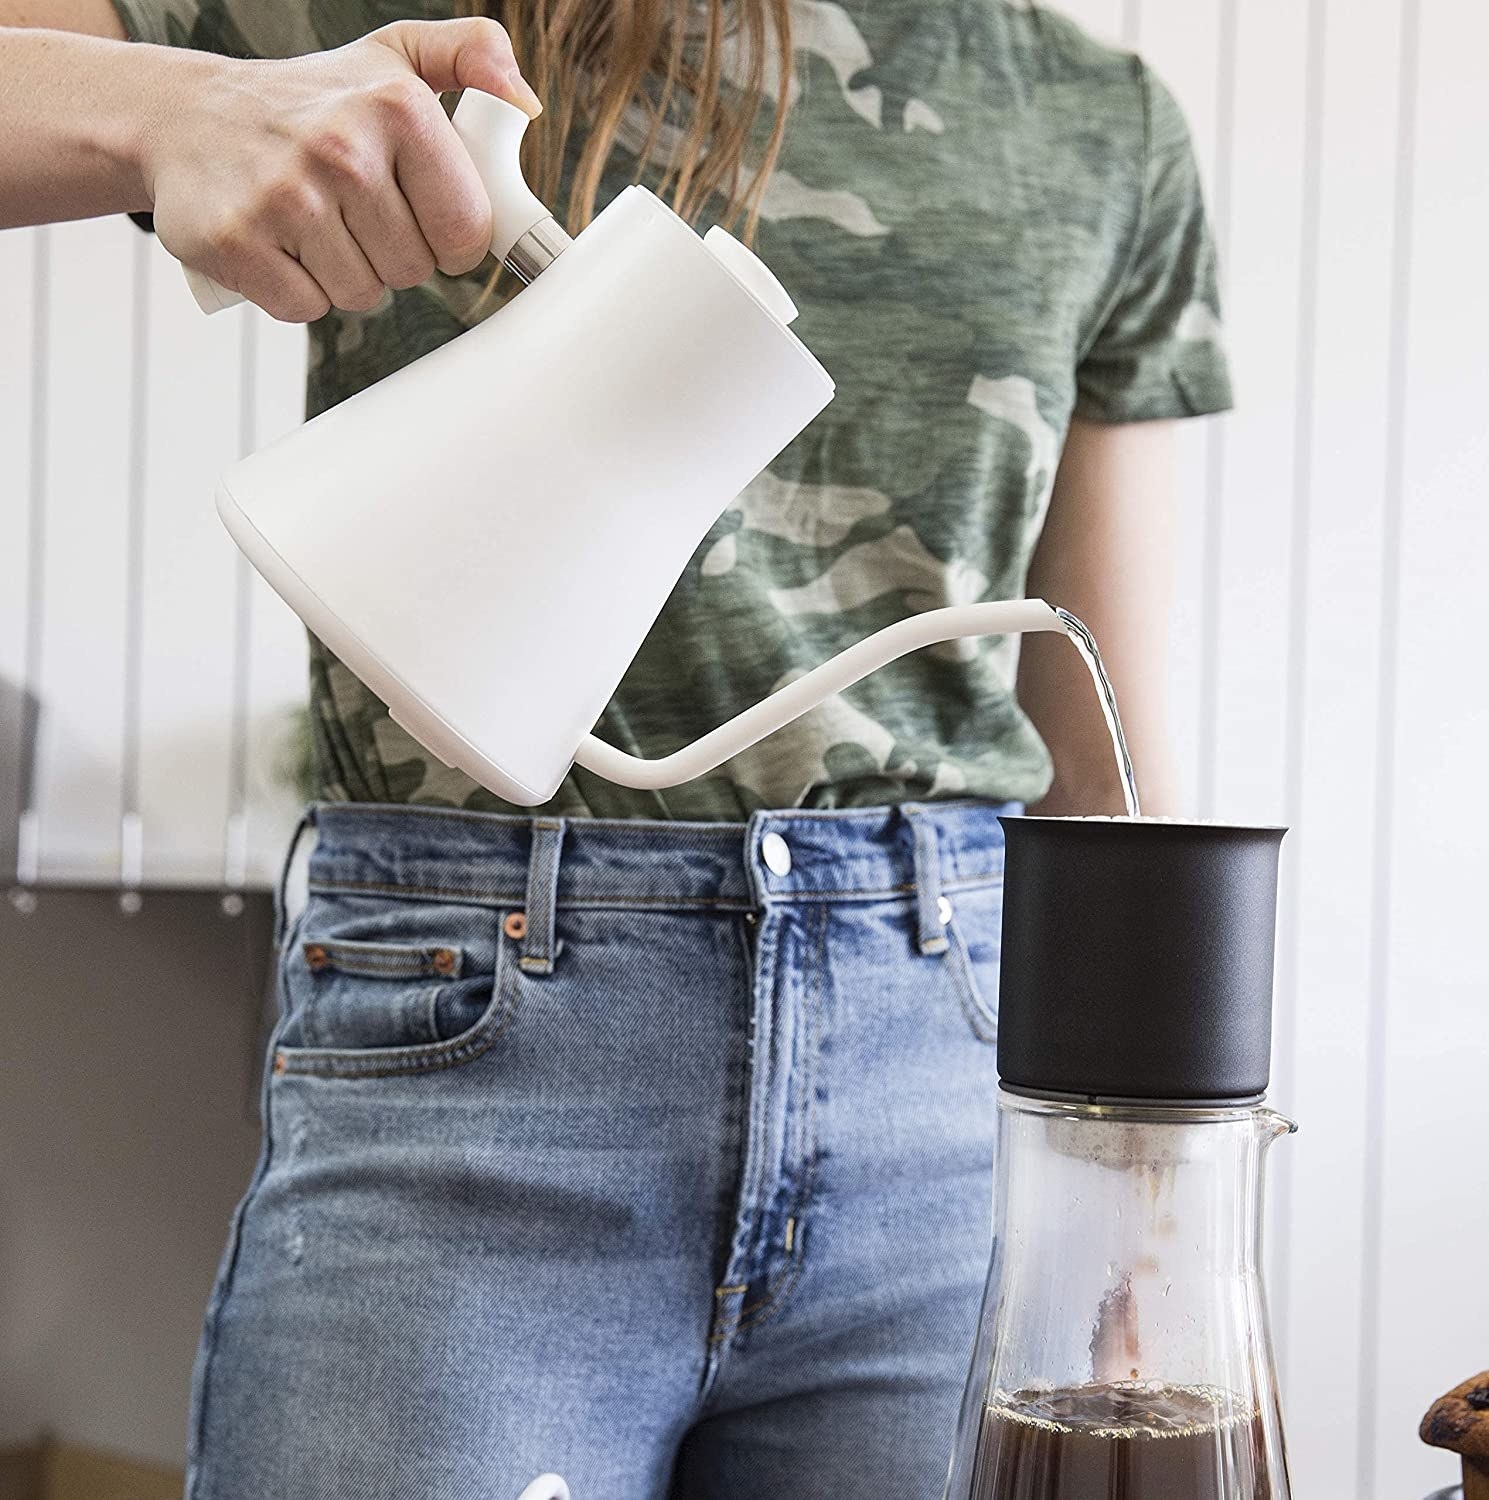 A person using the kettle to make pour-over coffee